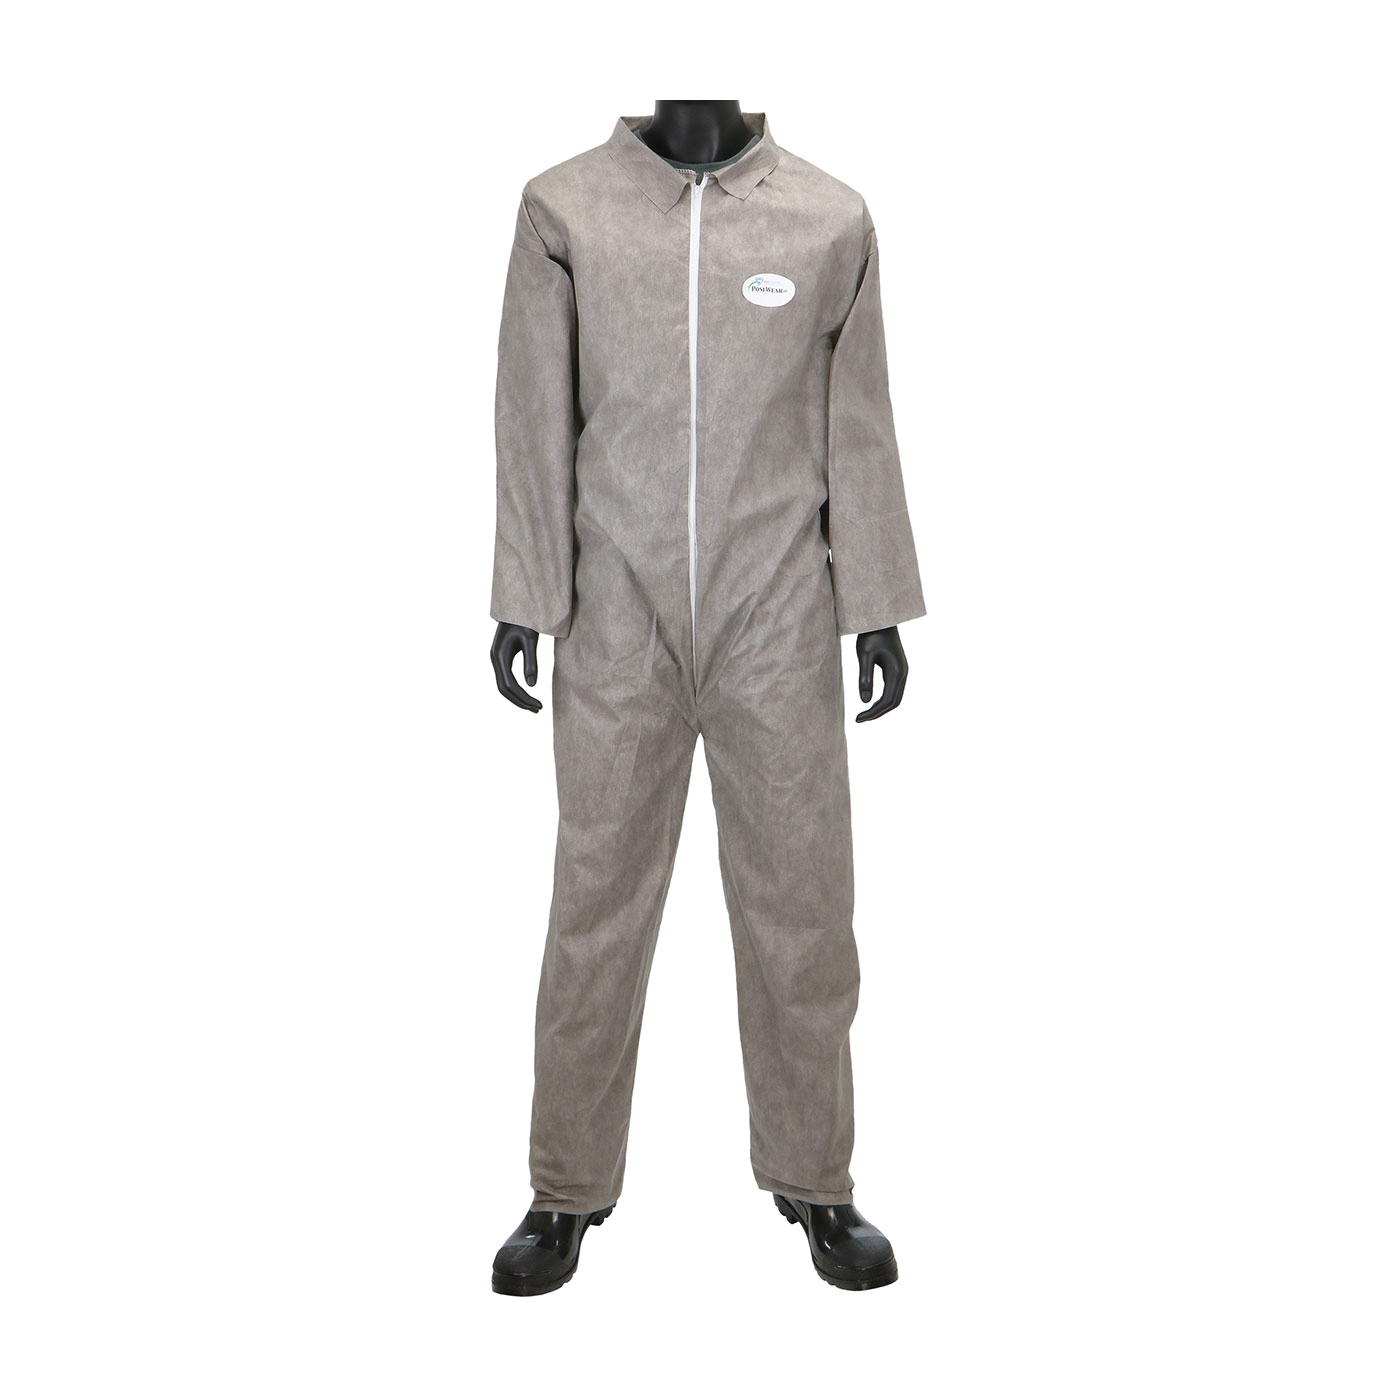 PIP® C3900/XXXL C3900 M3 Anti-Static Basic Disposable Coverall, 3XL, Gray, Polypropylene/SMMMS Fabric, 31-1/2 in Chest, 31-1/2 in L Inseam